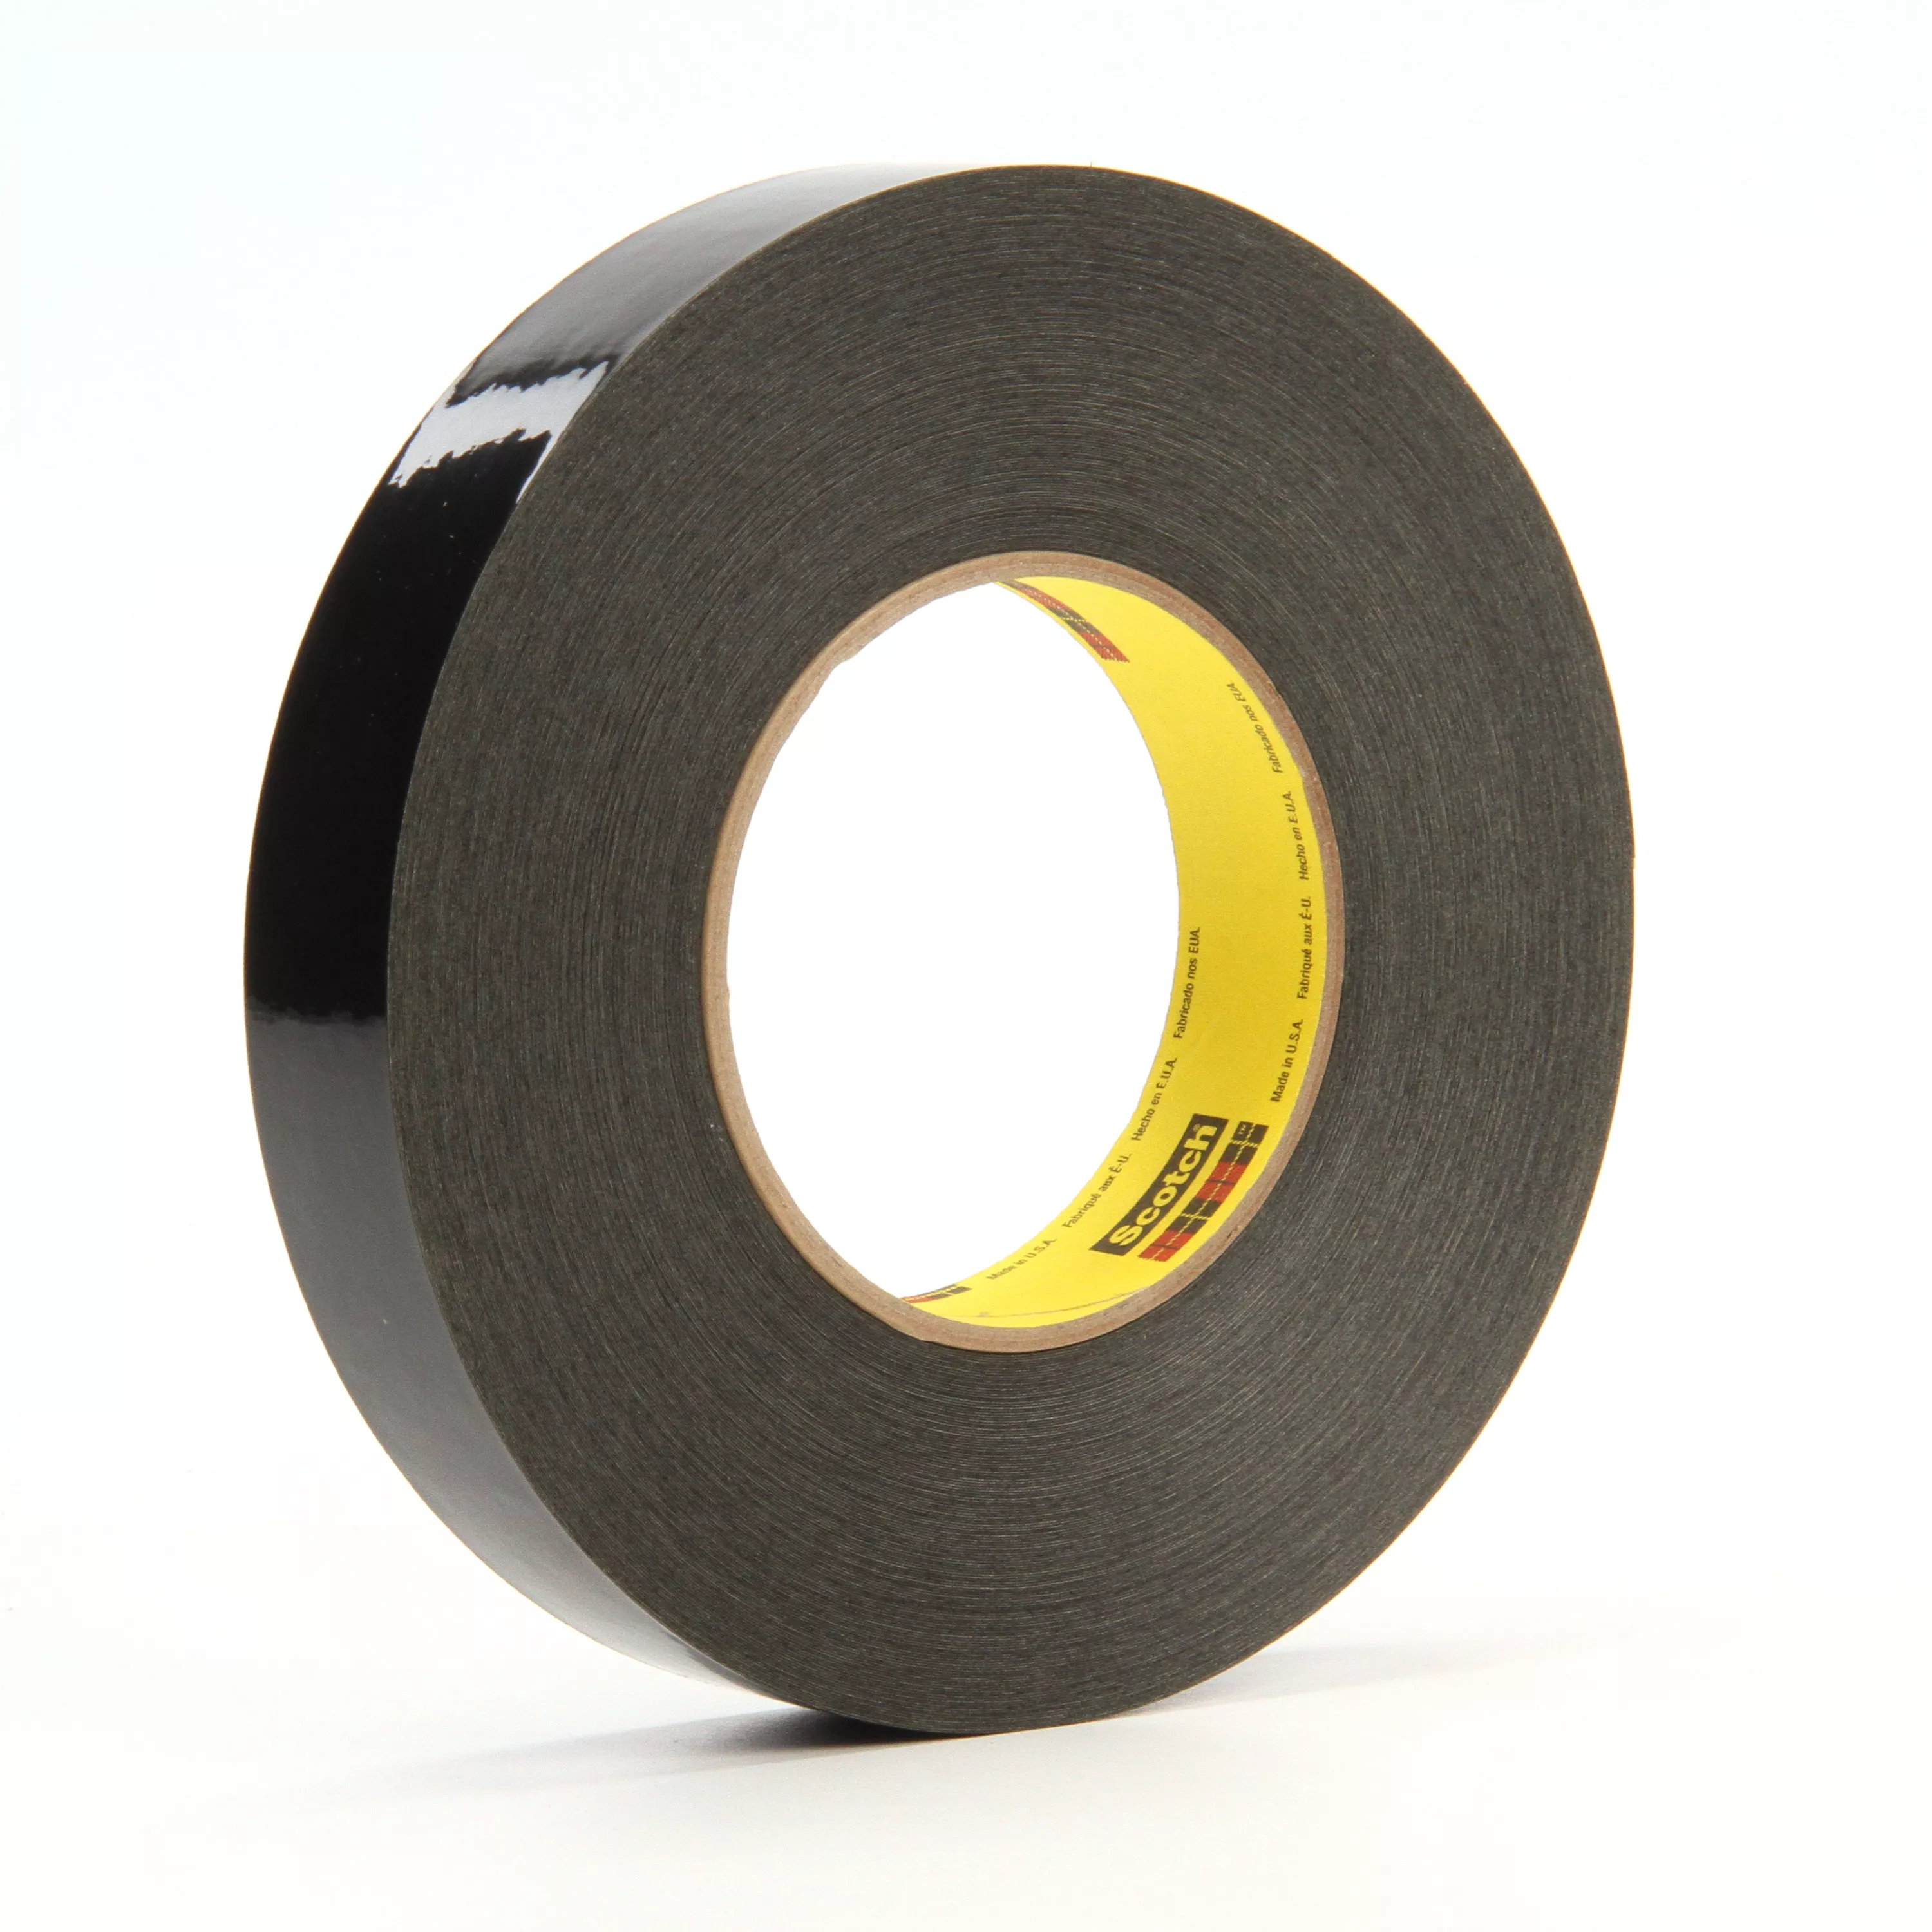 Scotch® Solvent Resistant Masking Tape 226, Black, 1 in x 60 yd, 10.6
mil, 36/Case